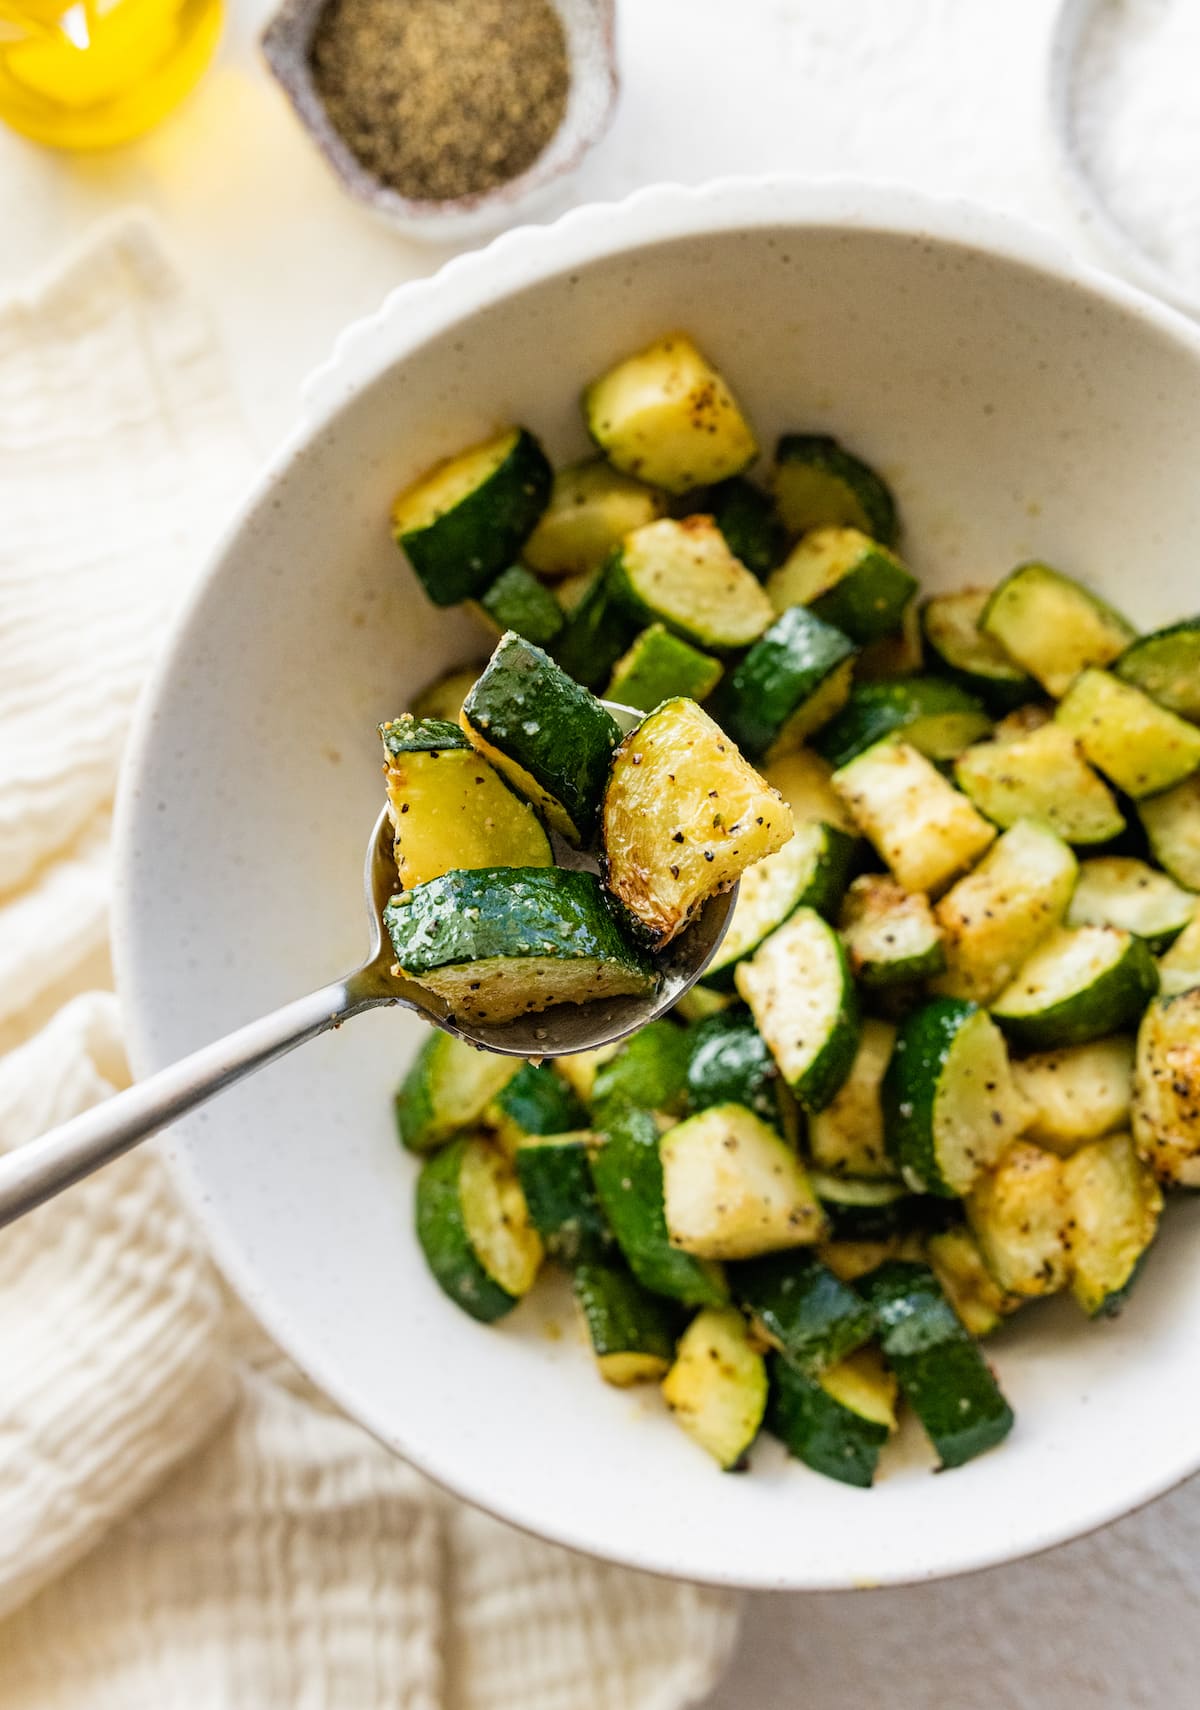 Air-fried zucchini in a bowl with a metal spoon.